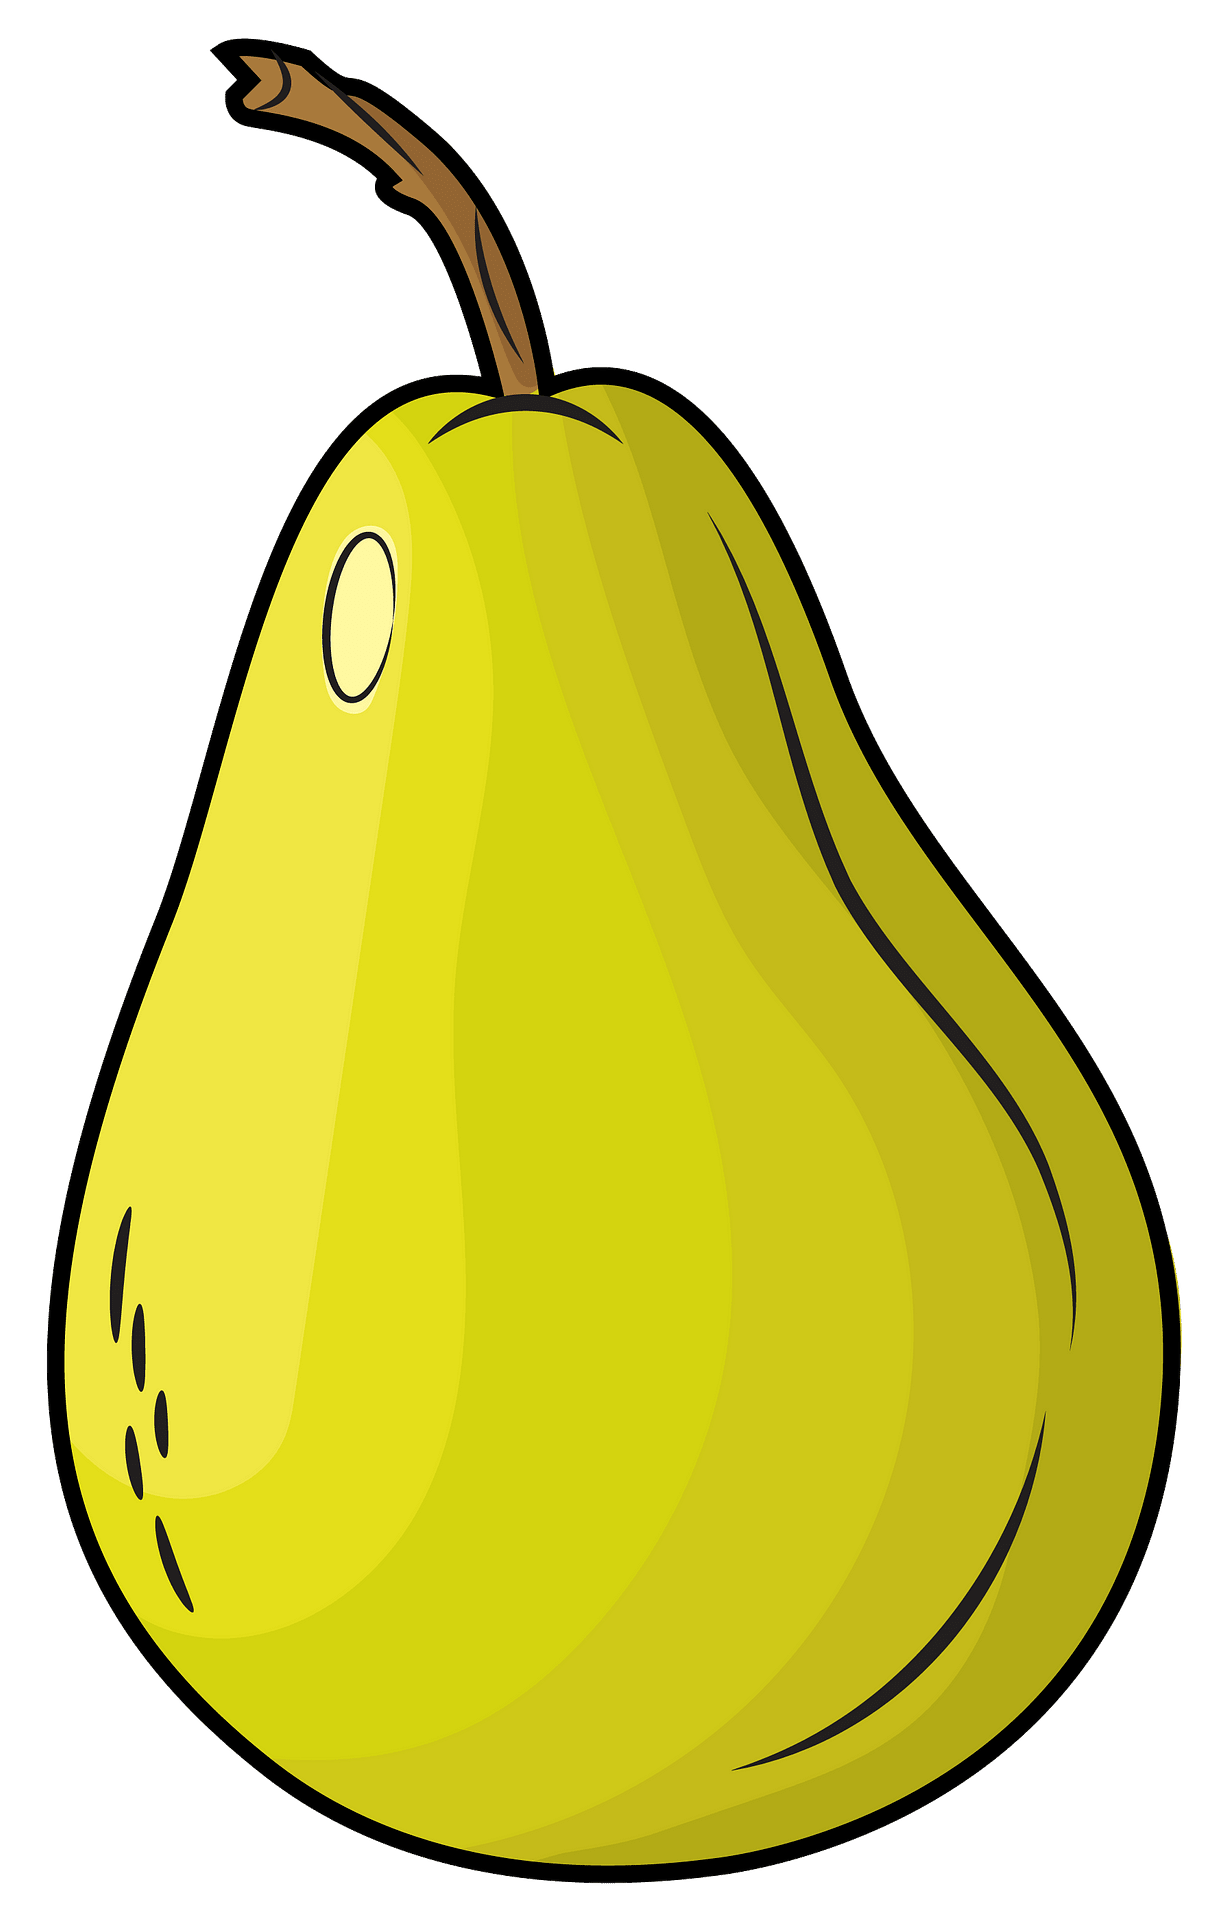 Pear clipart. Free download..